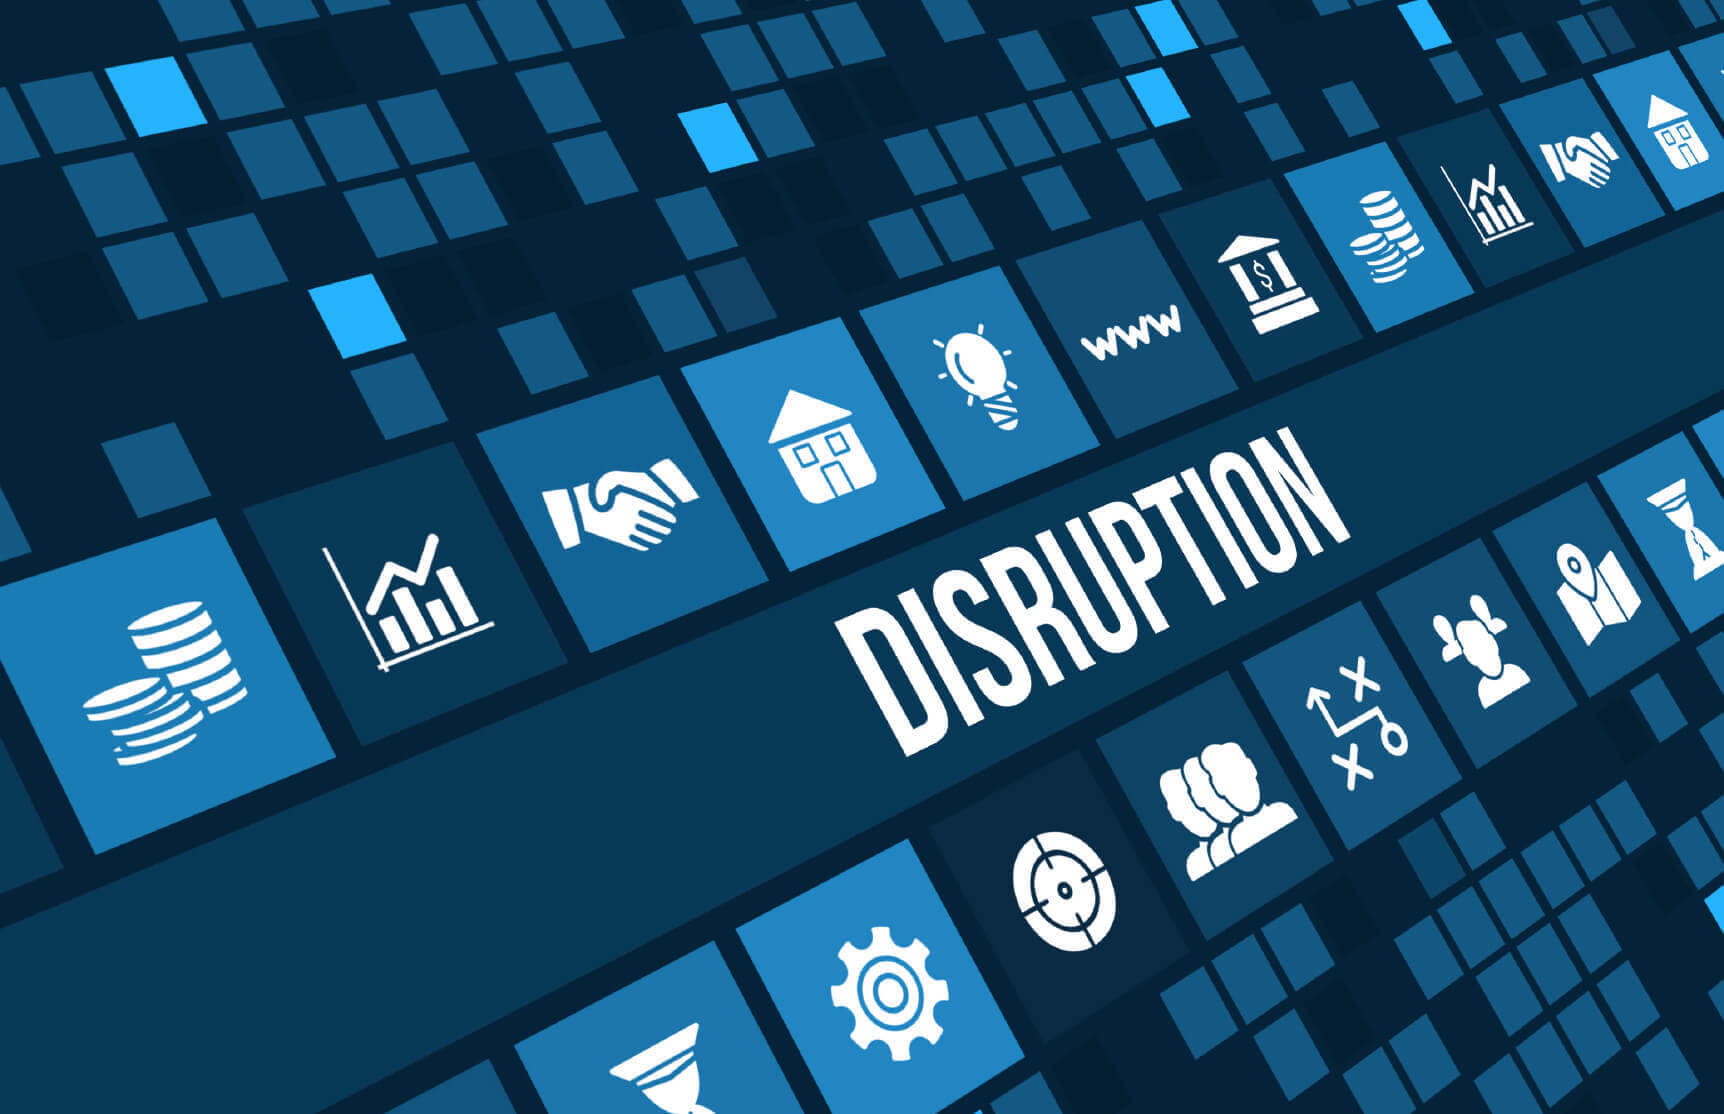 Disruption-concept-image-with-business-icons-and-copyspace